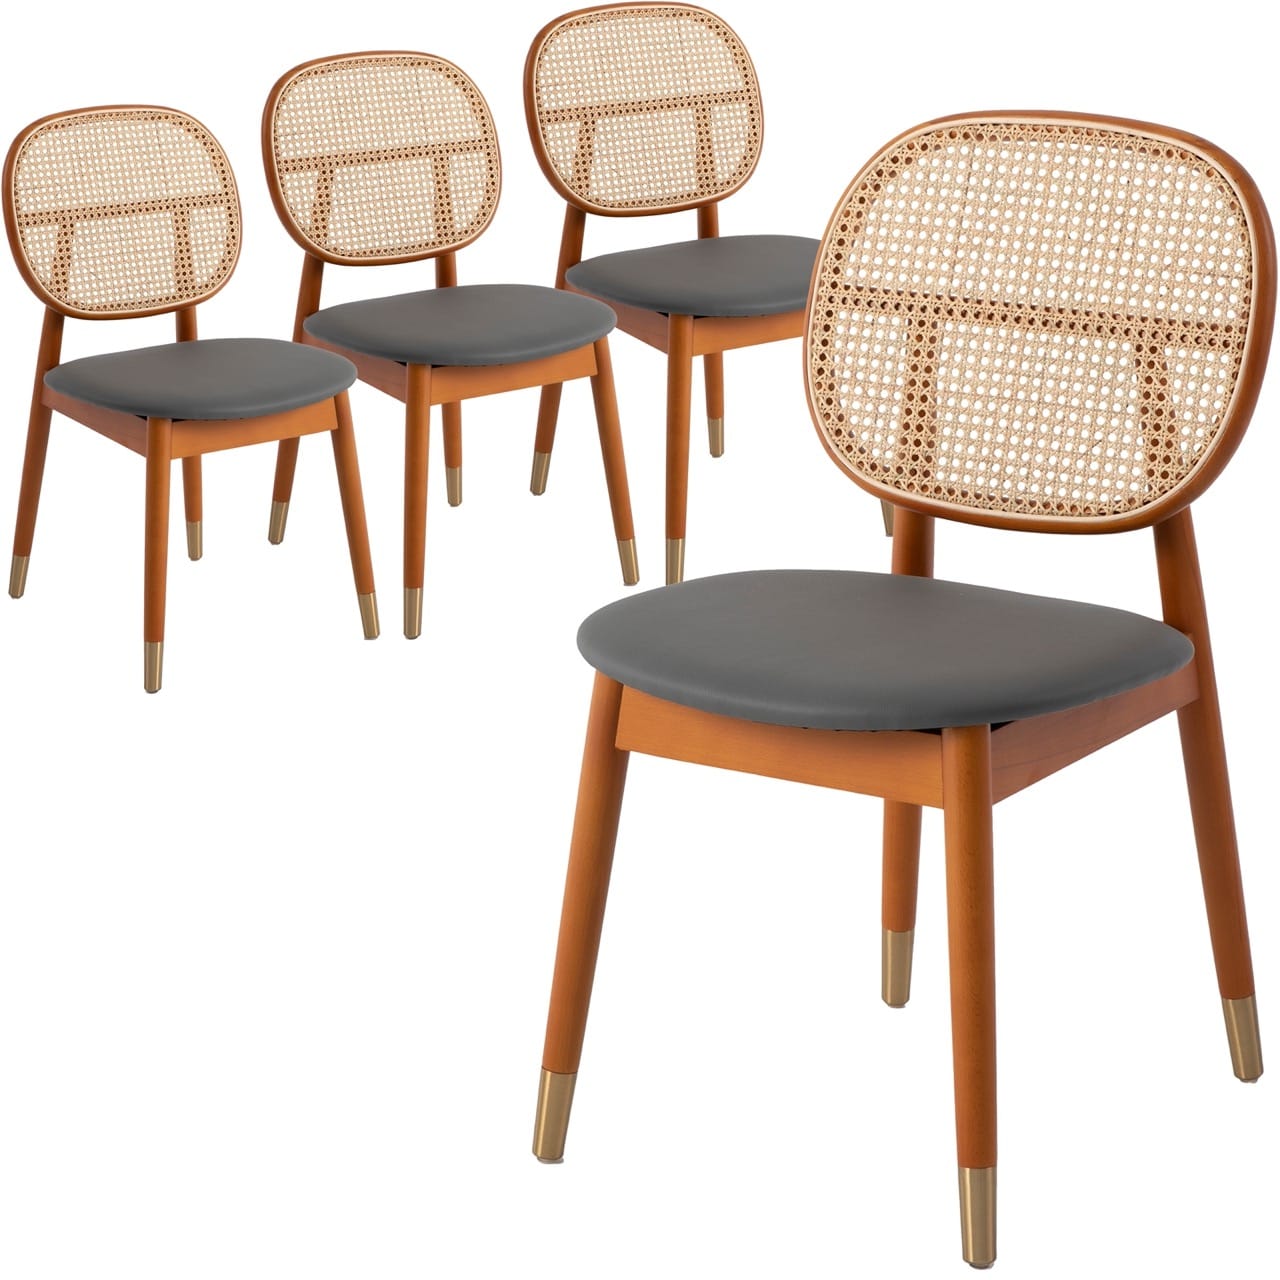 Holbeck Wicker Dining Chair with Leather Seat Set of 4, Grey by LeisureMod